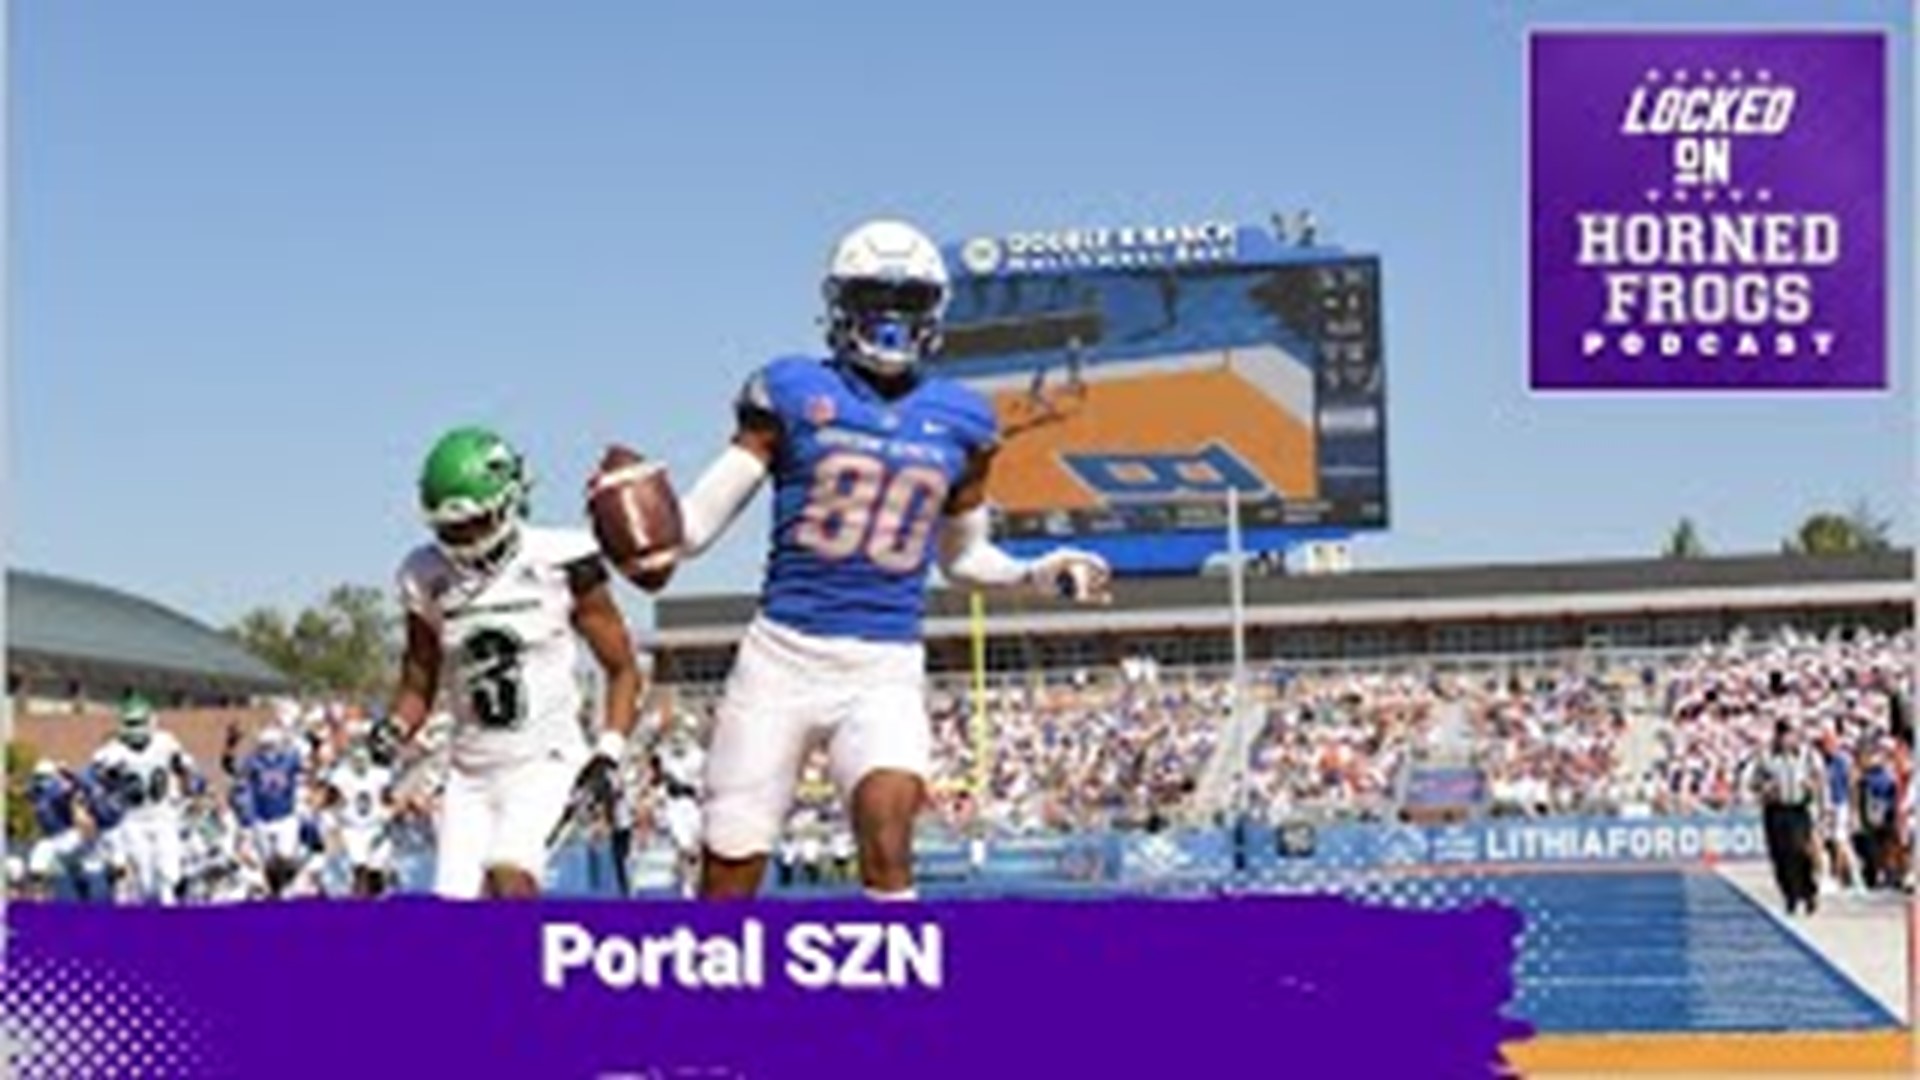 The TCU Horned Frogs are going after a Boise State WR in the portal